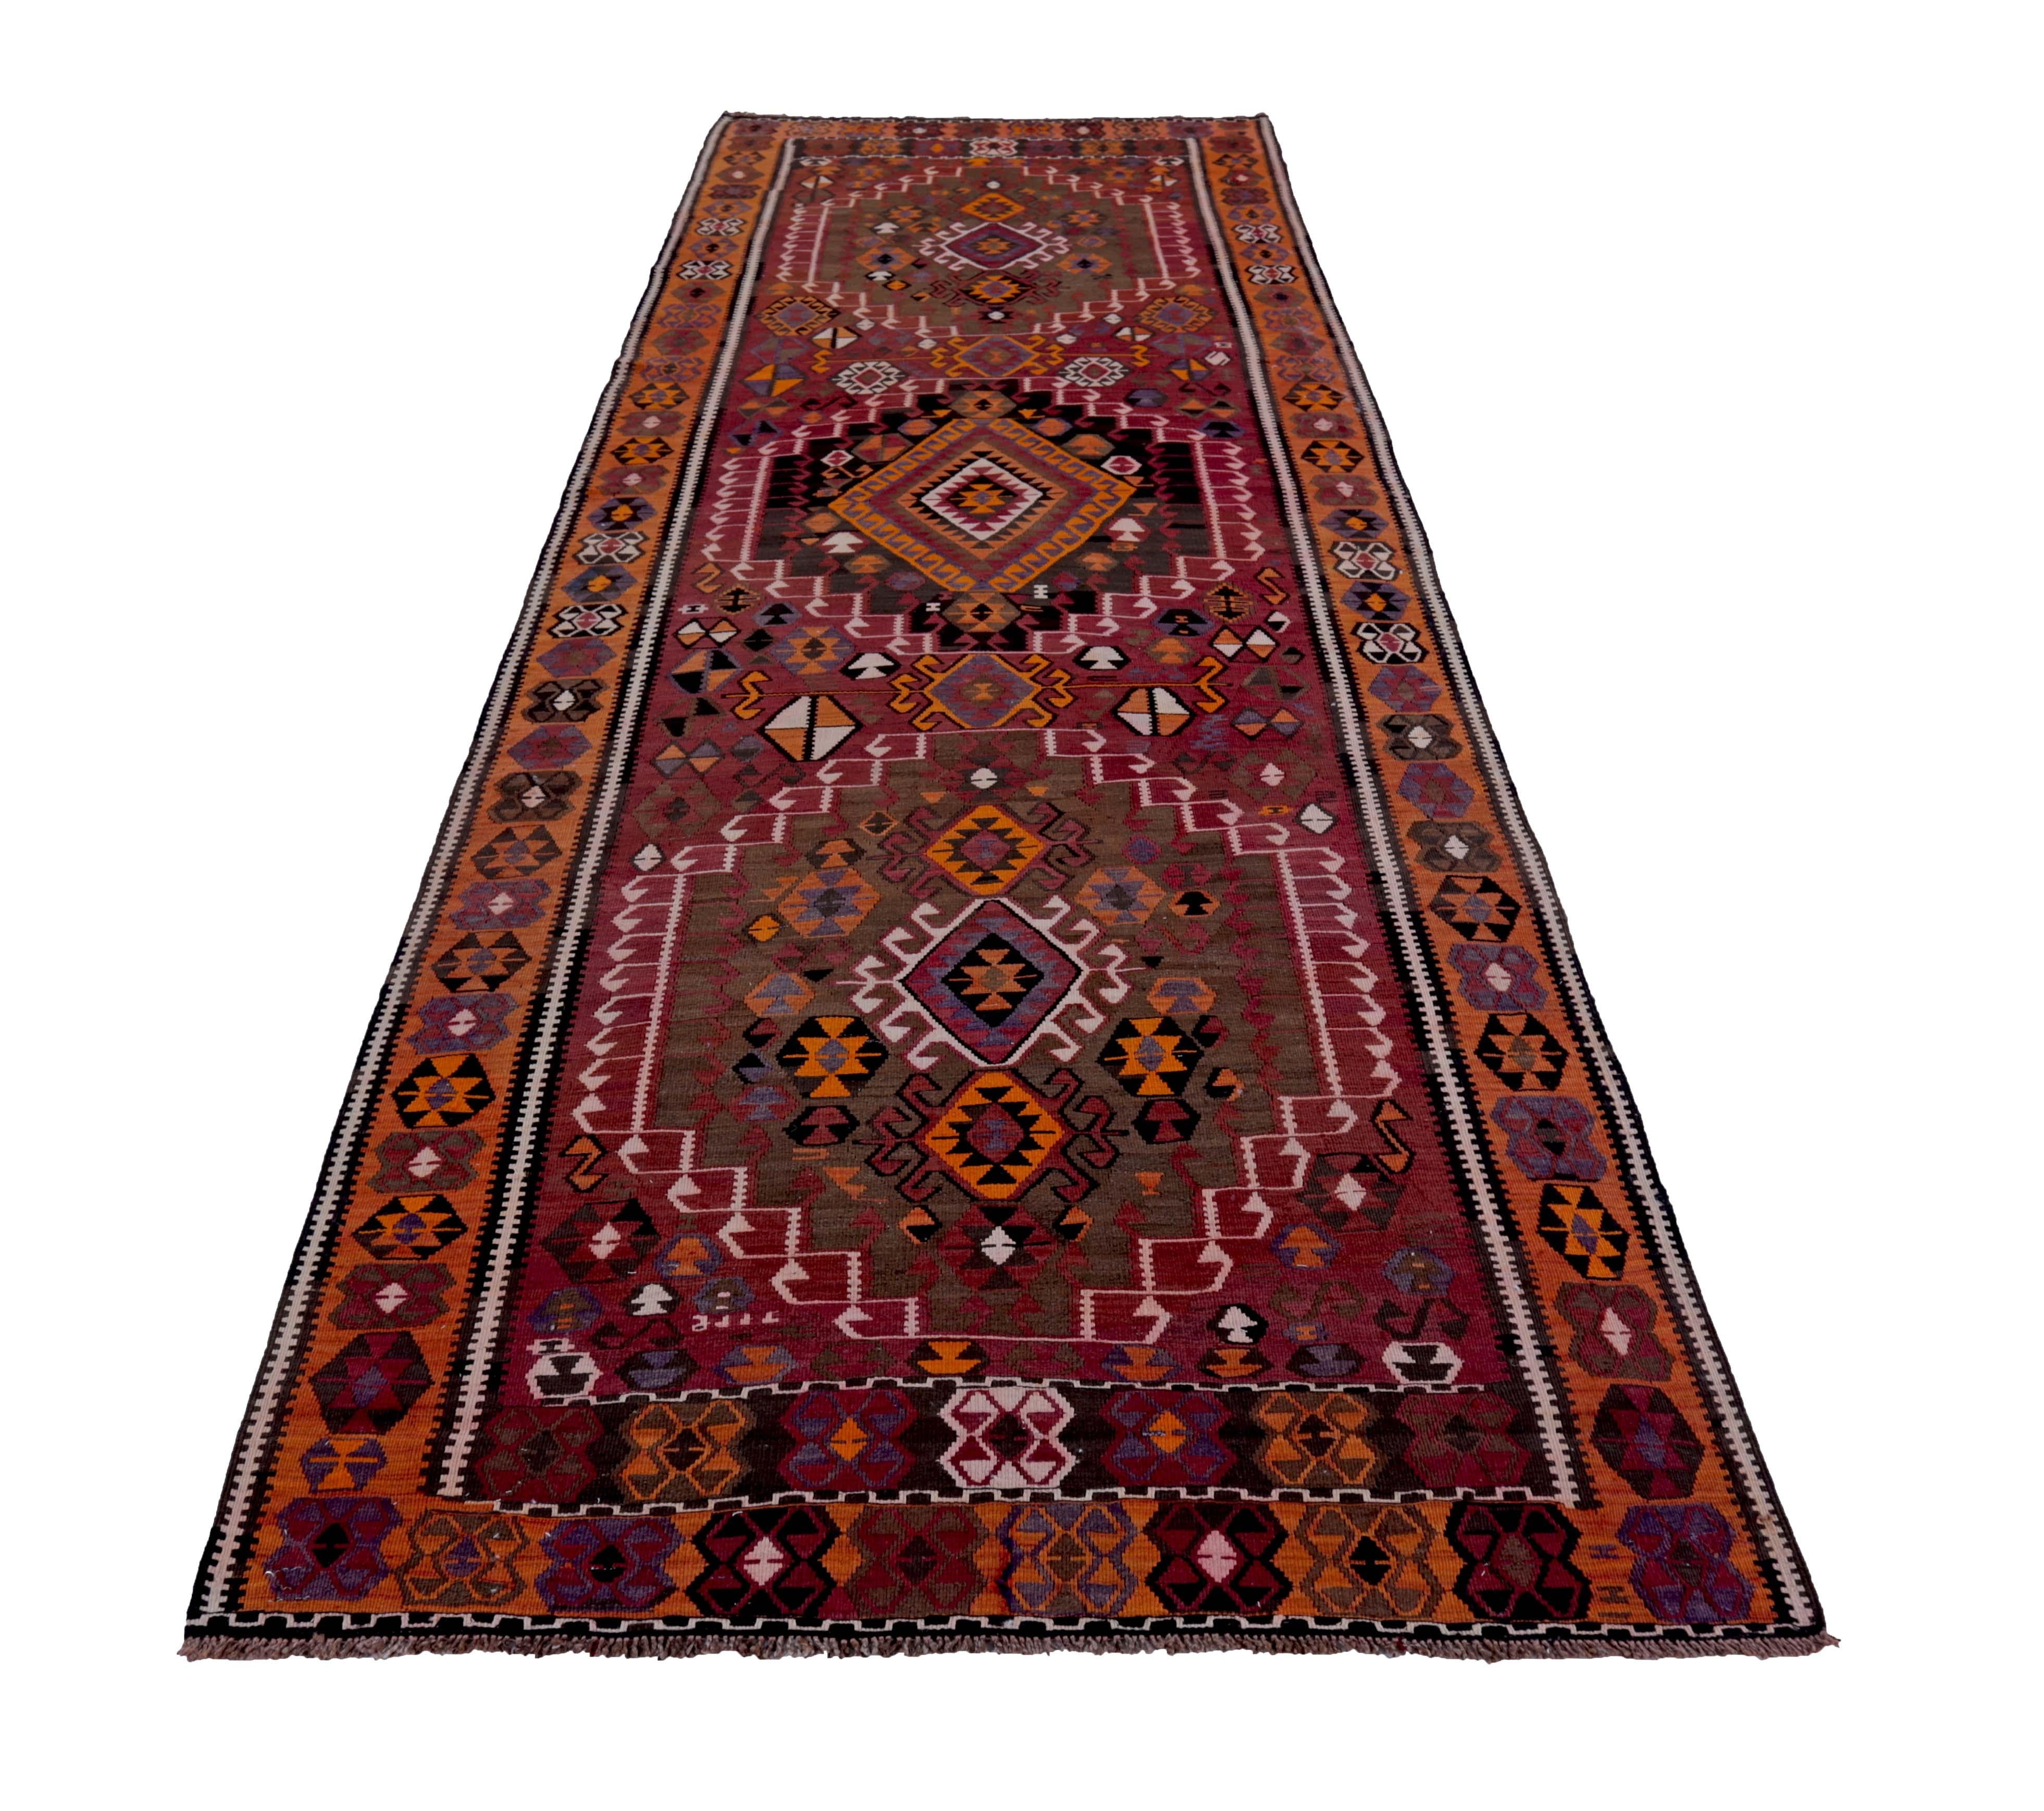 Turkish rug handwoven from the finest sheep’s wool and colored with all-natural vegetable dyes that are safe for humans and pets. It’s a traditional Kilim flat-weave design featuring red, orange and brown tribal designs. It’s a stunning piece to get